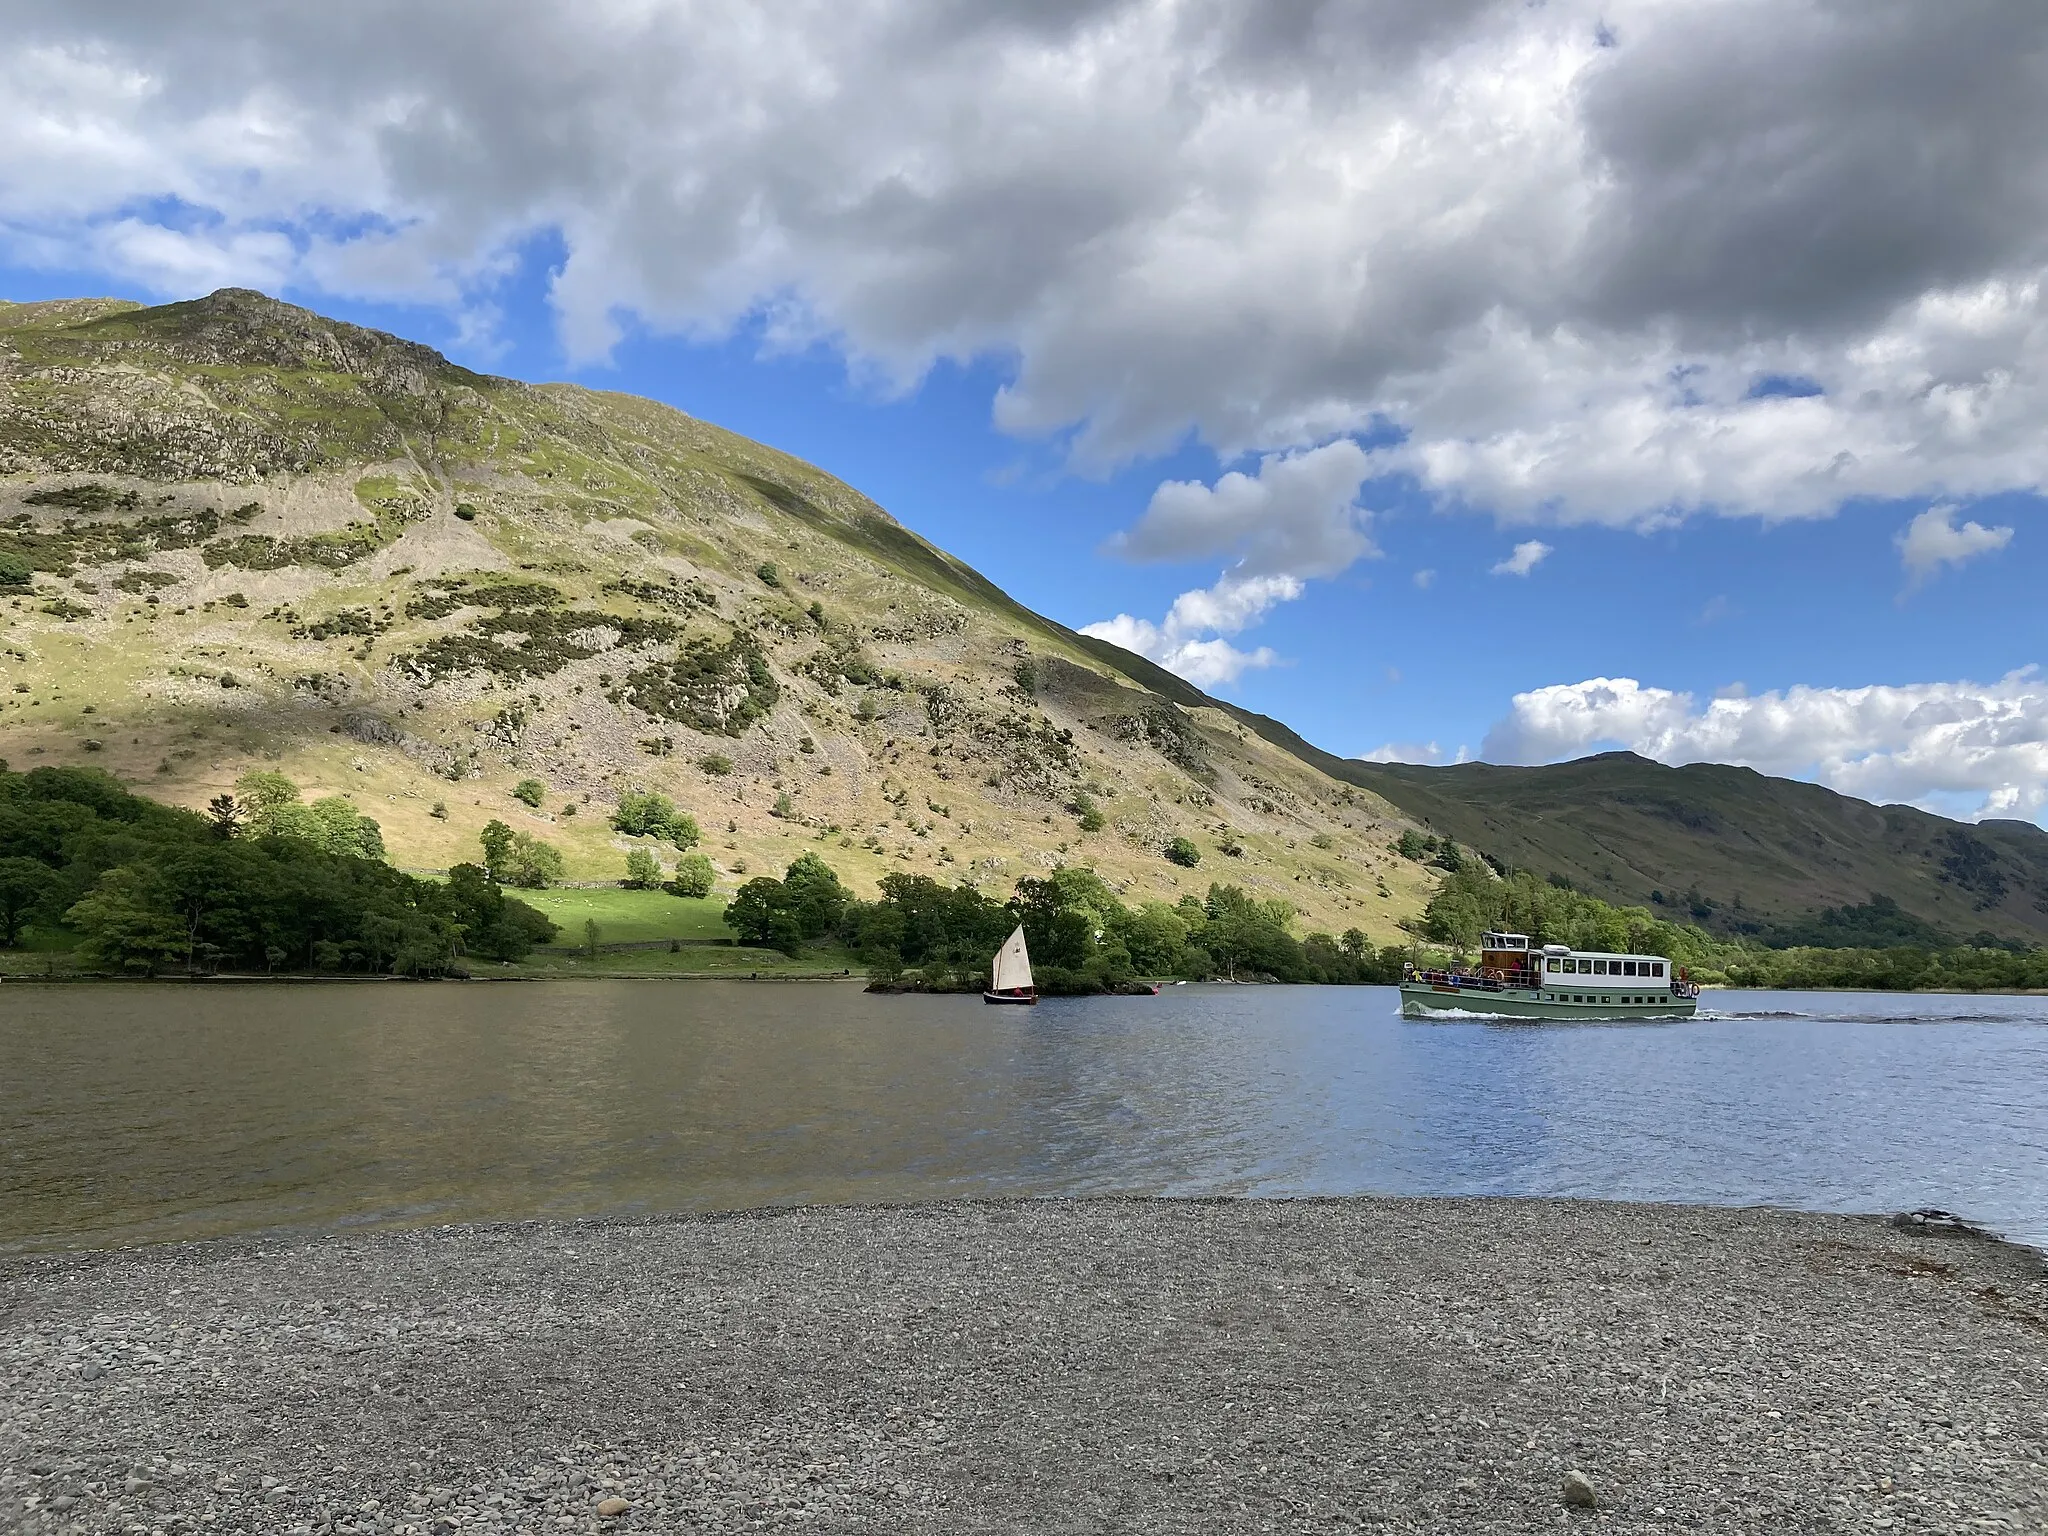 Photo showing: Place Fell is a hill in the Lake District, England. It is quite close to Ullswater. This photo was taken from the other side of the lake at Glenredding, near where the Glenridding Beck flows into the lake. A small cruise ship and small sailing boat can also be seen.